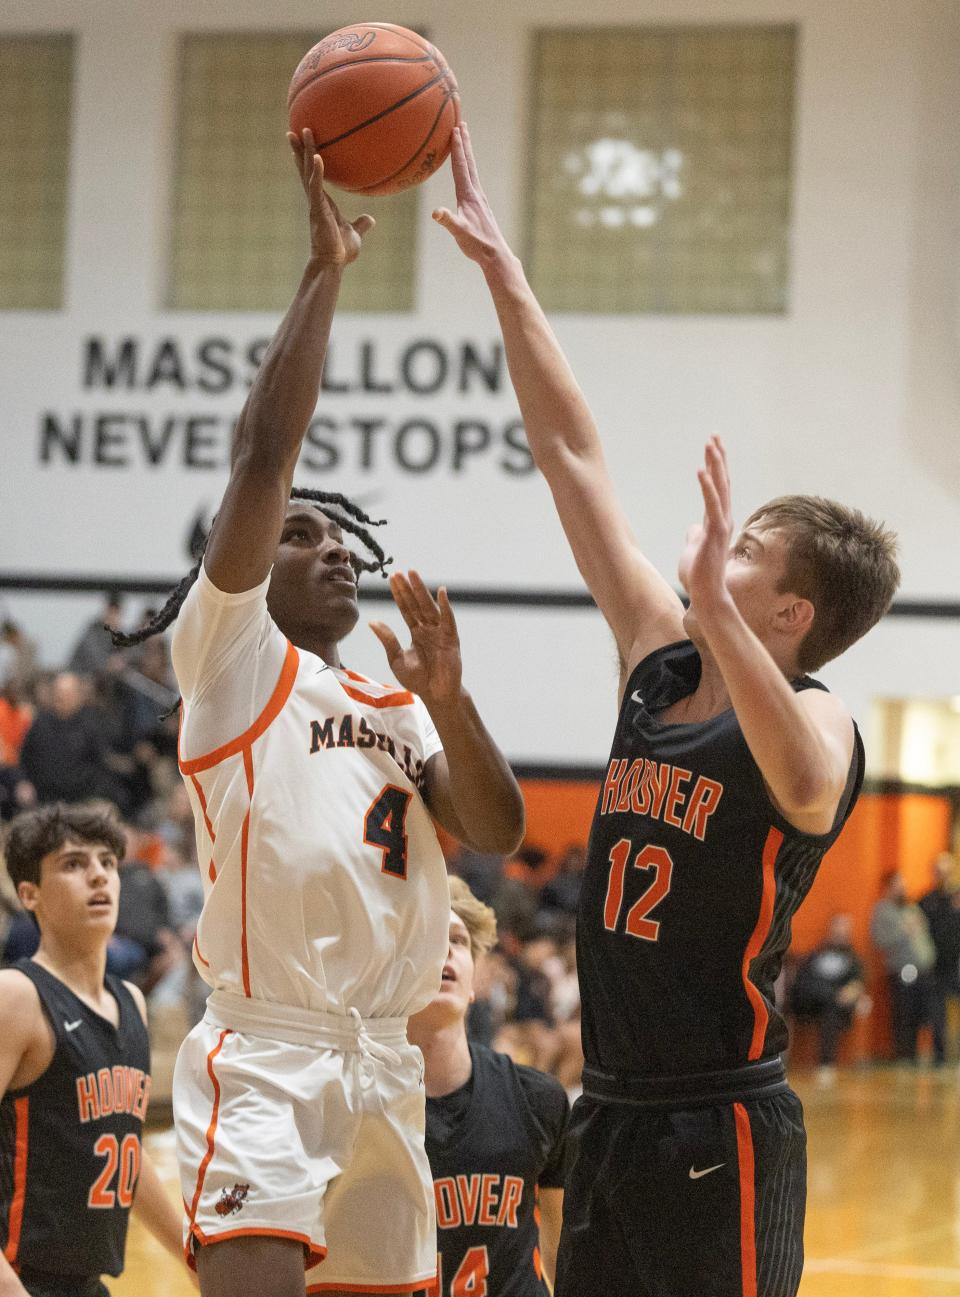 Massillon's Terrelle Keyes shoots in the first half as Hoover's Hudson Pringle defends.